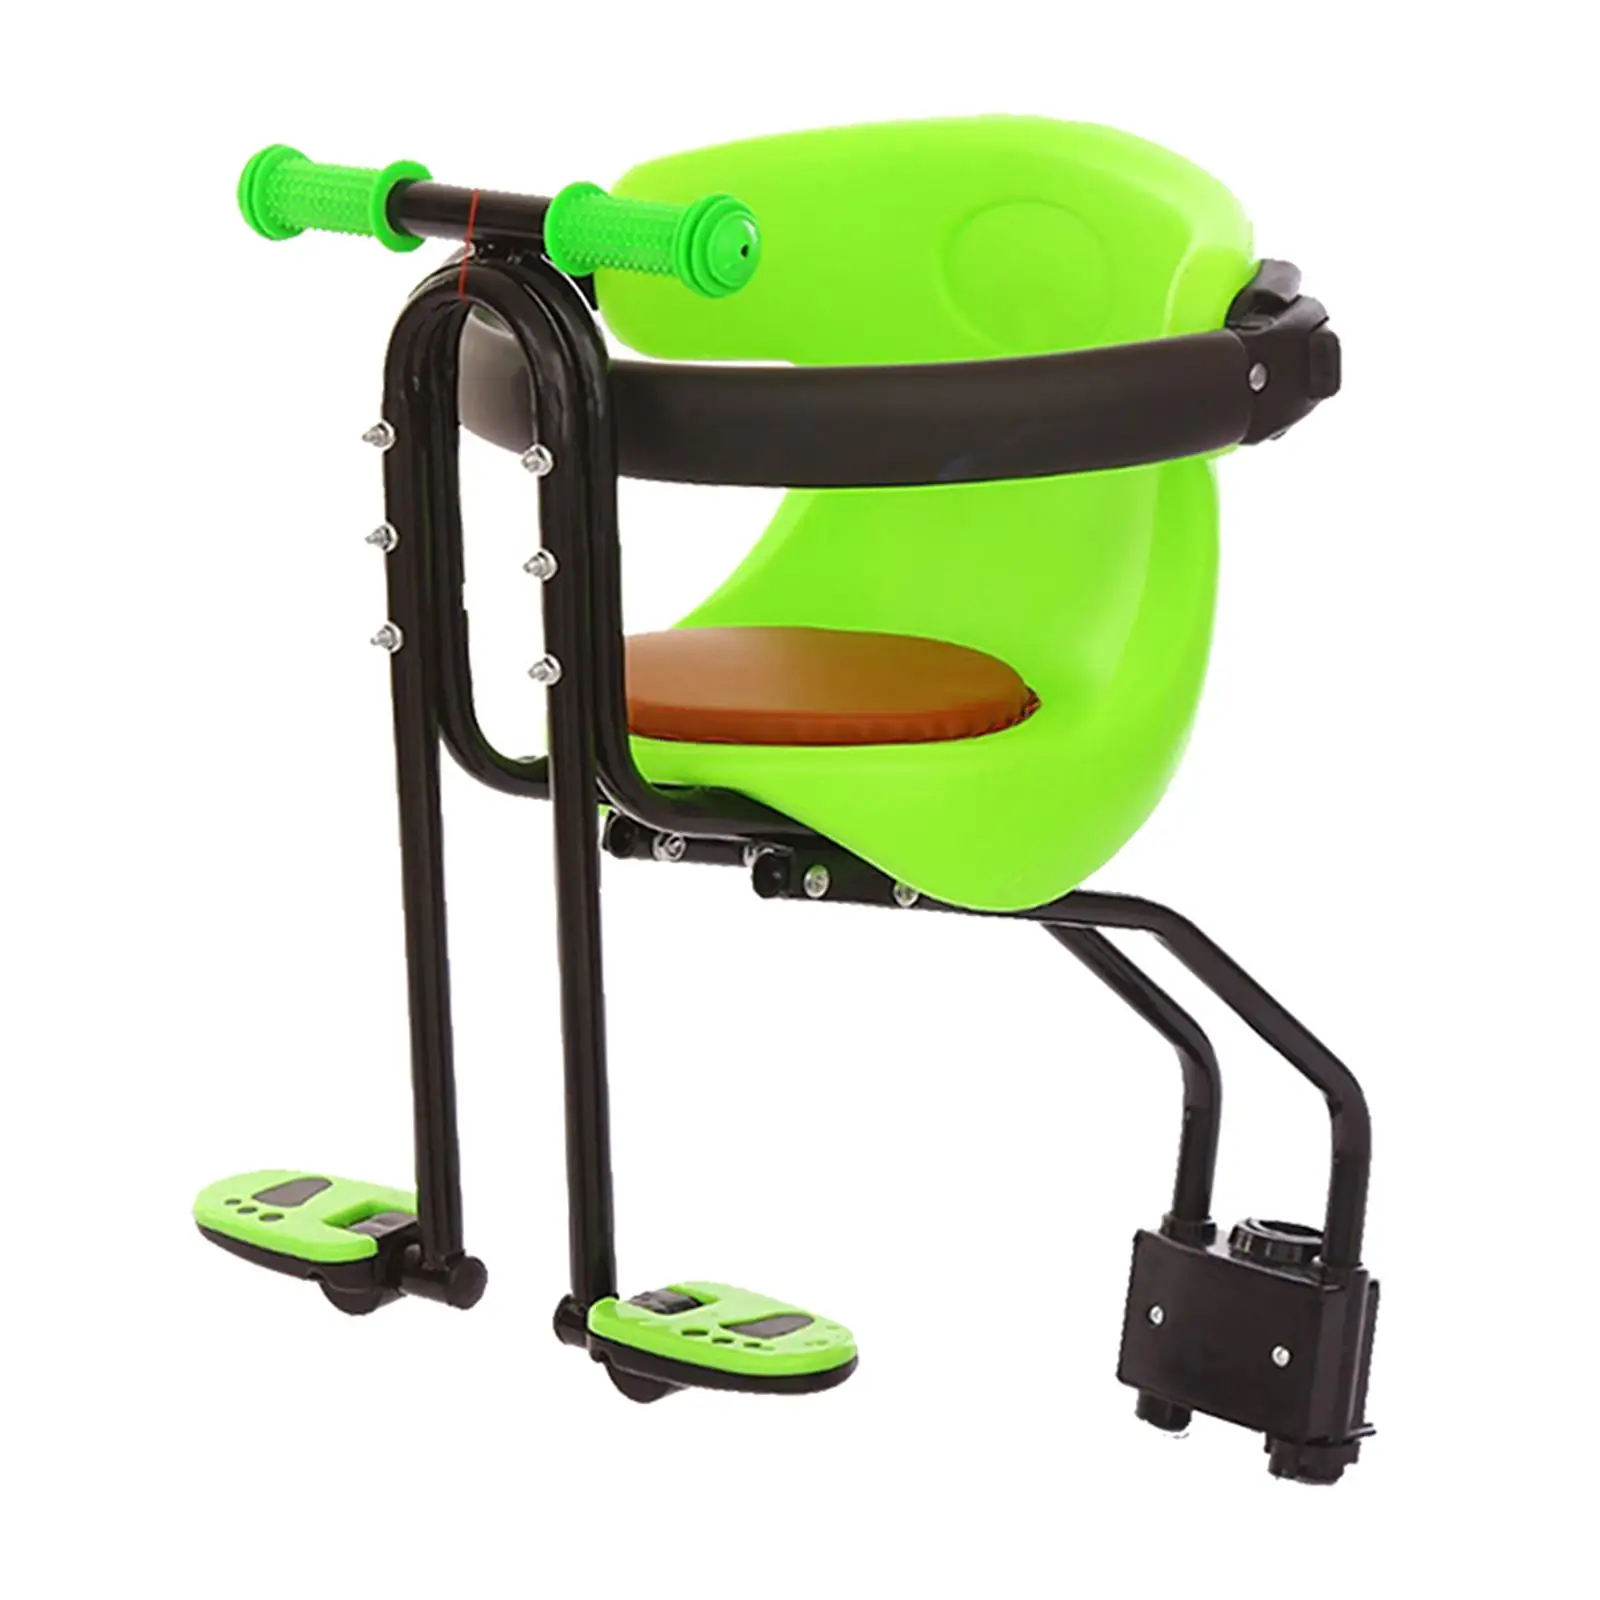 Bike Bicycle Safety Baby Kids Child Seat Saddle Front Carrier with Handrail